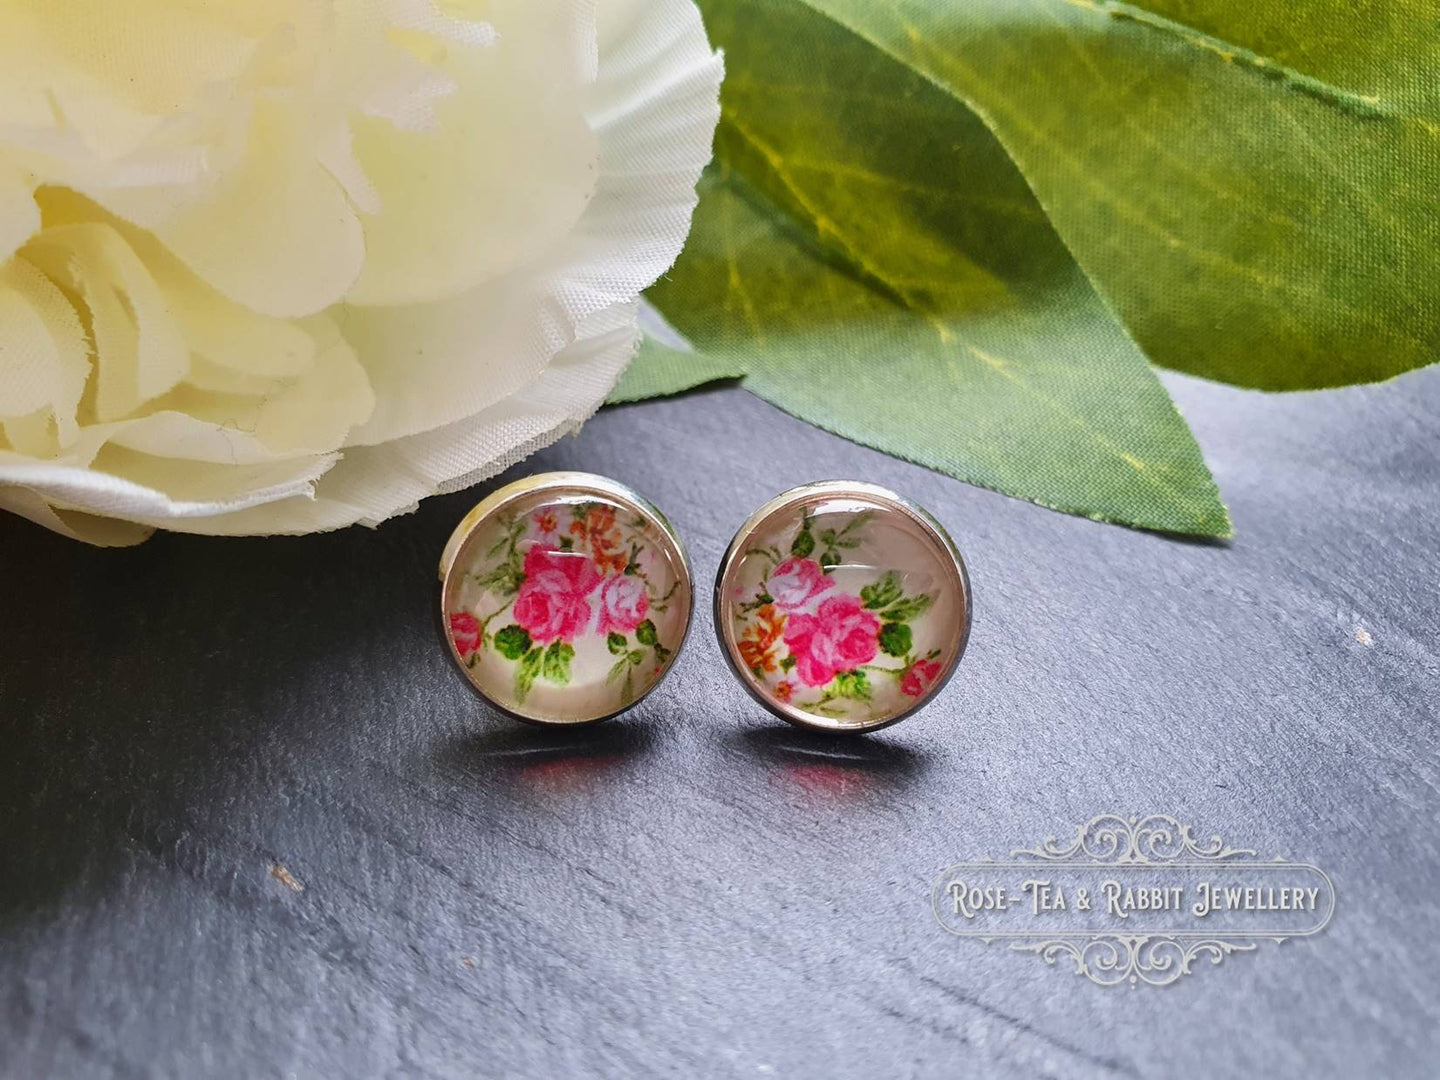 Ivory/Pink Floral Print Stud Earring - Vintage Style - Glass Photo Cabochon - Silver Plated - Hypoallergenic - 12mm Diameter (0.47 Inches)